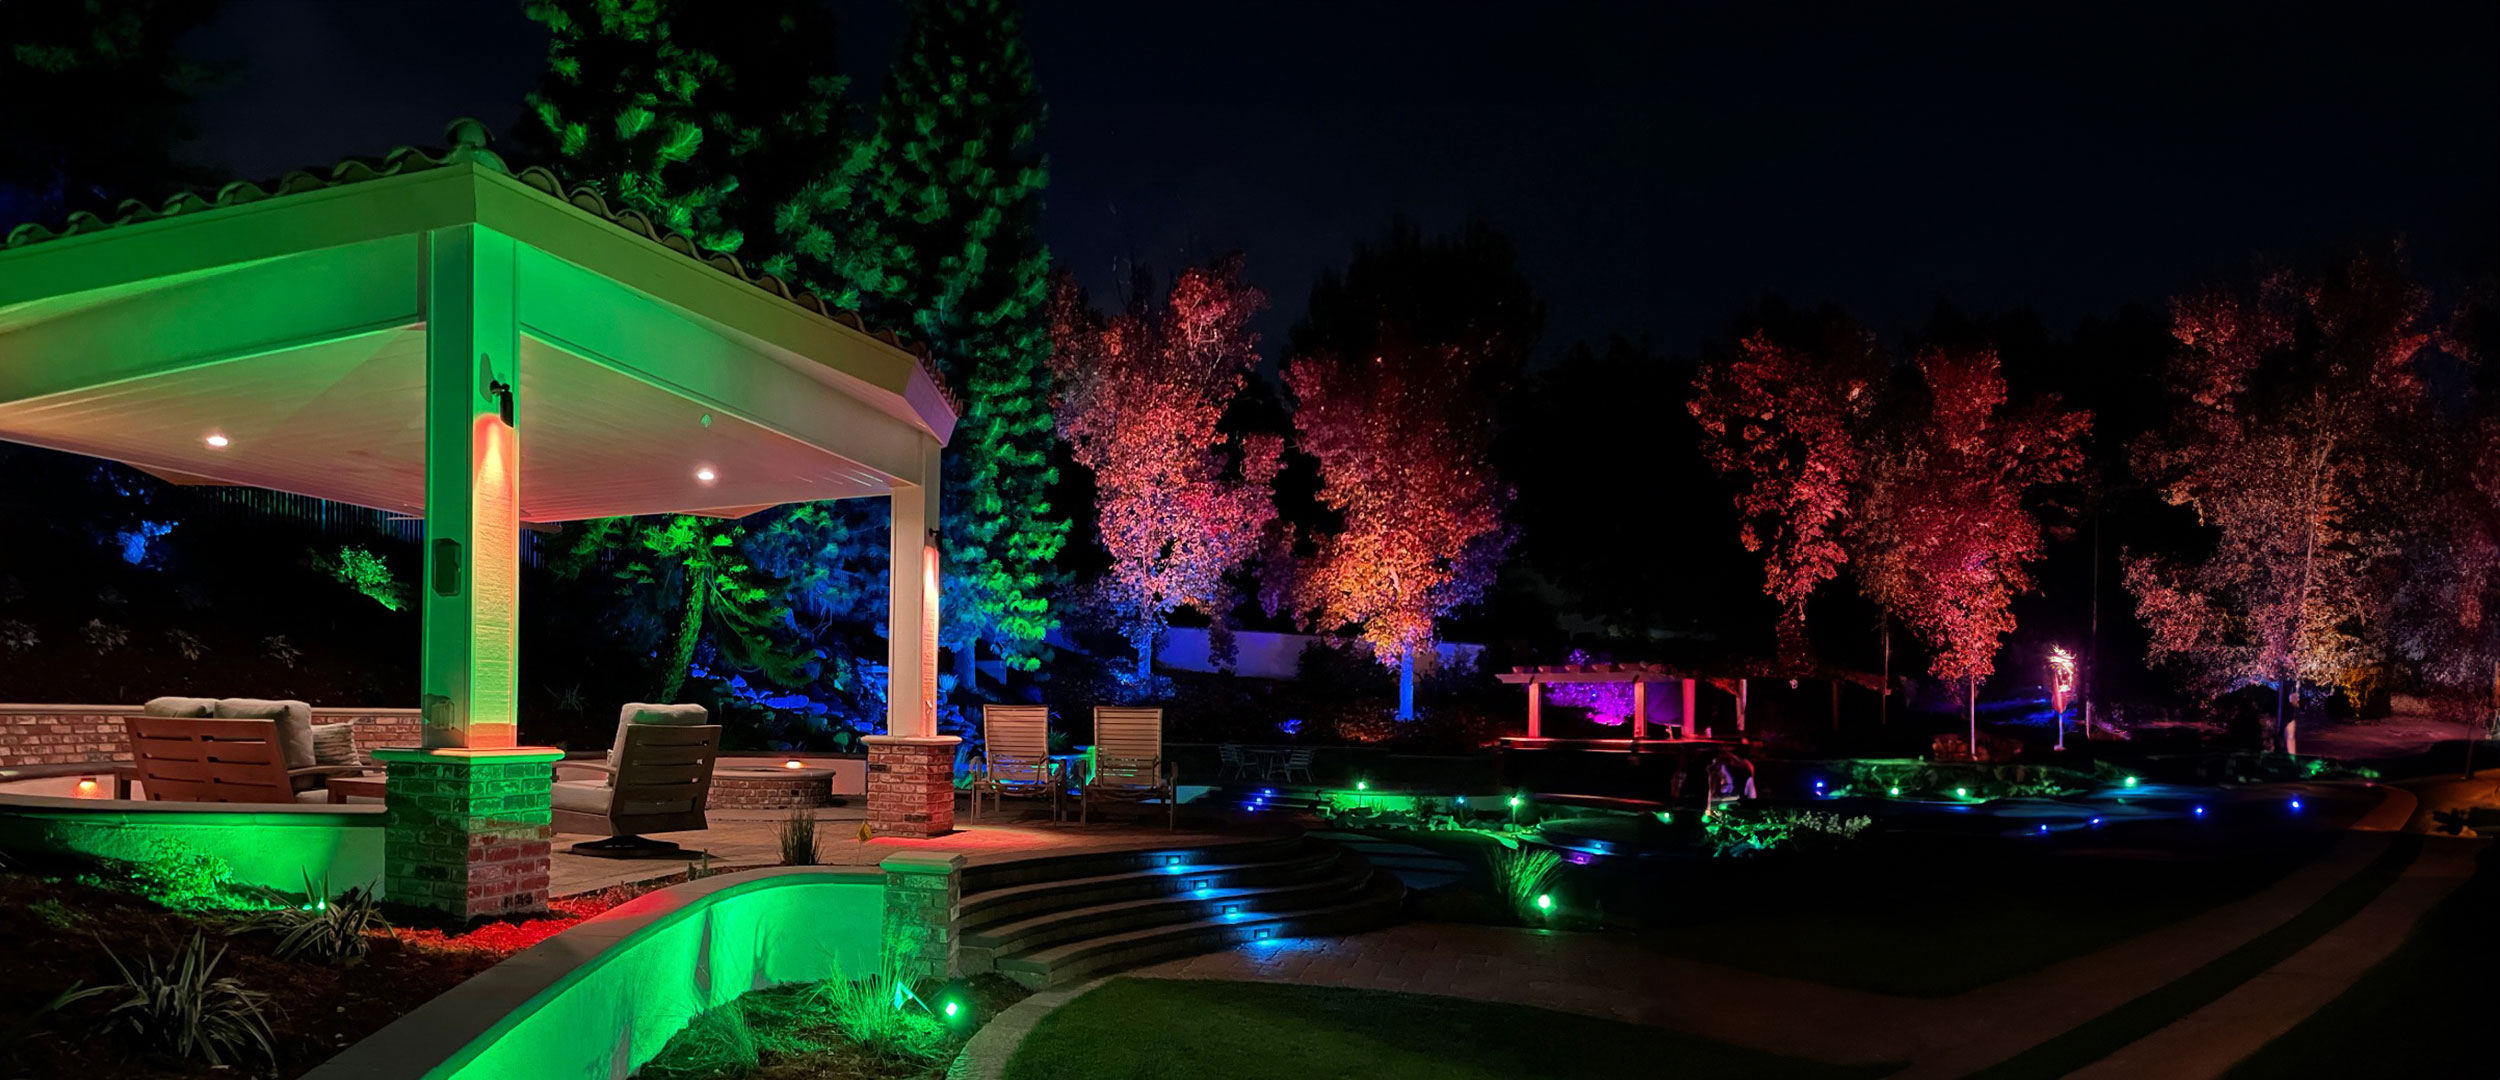 How to Install Low Voltage Outdoor Landscape Lighting - 10 Easy